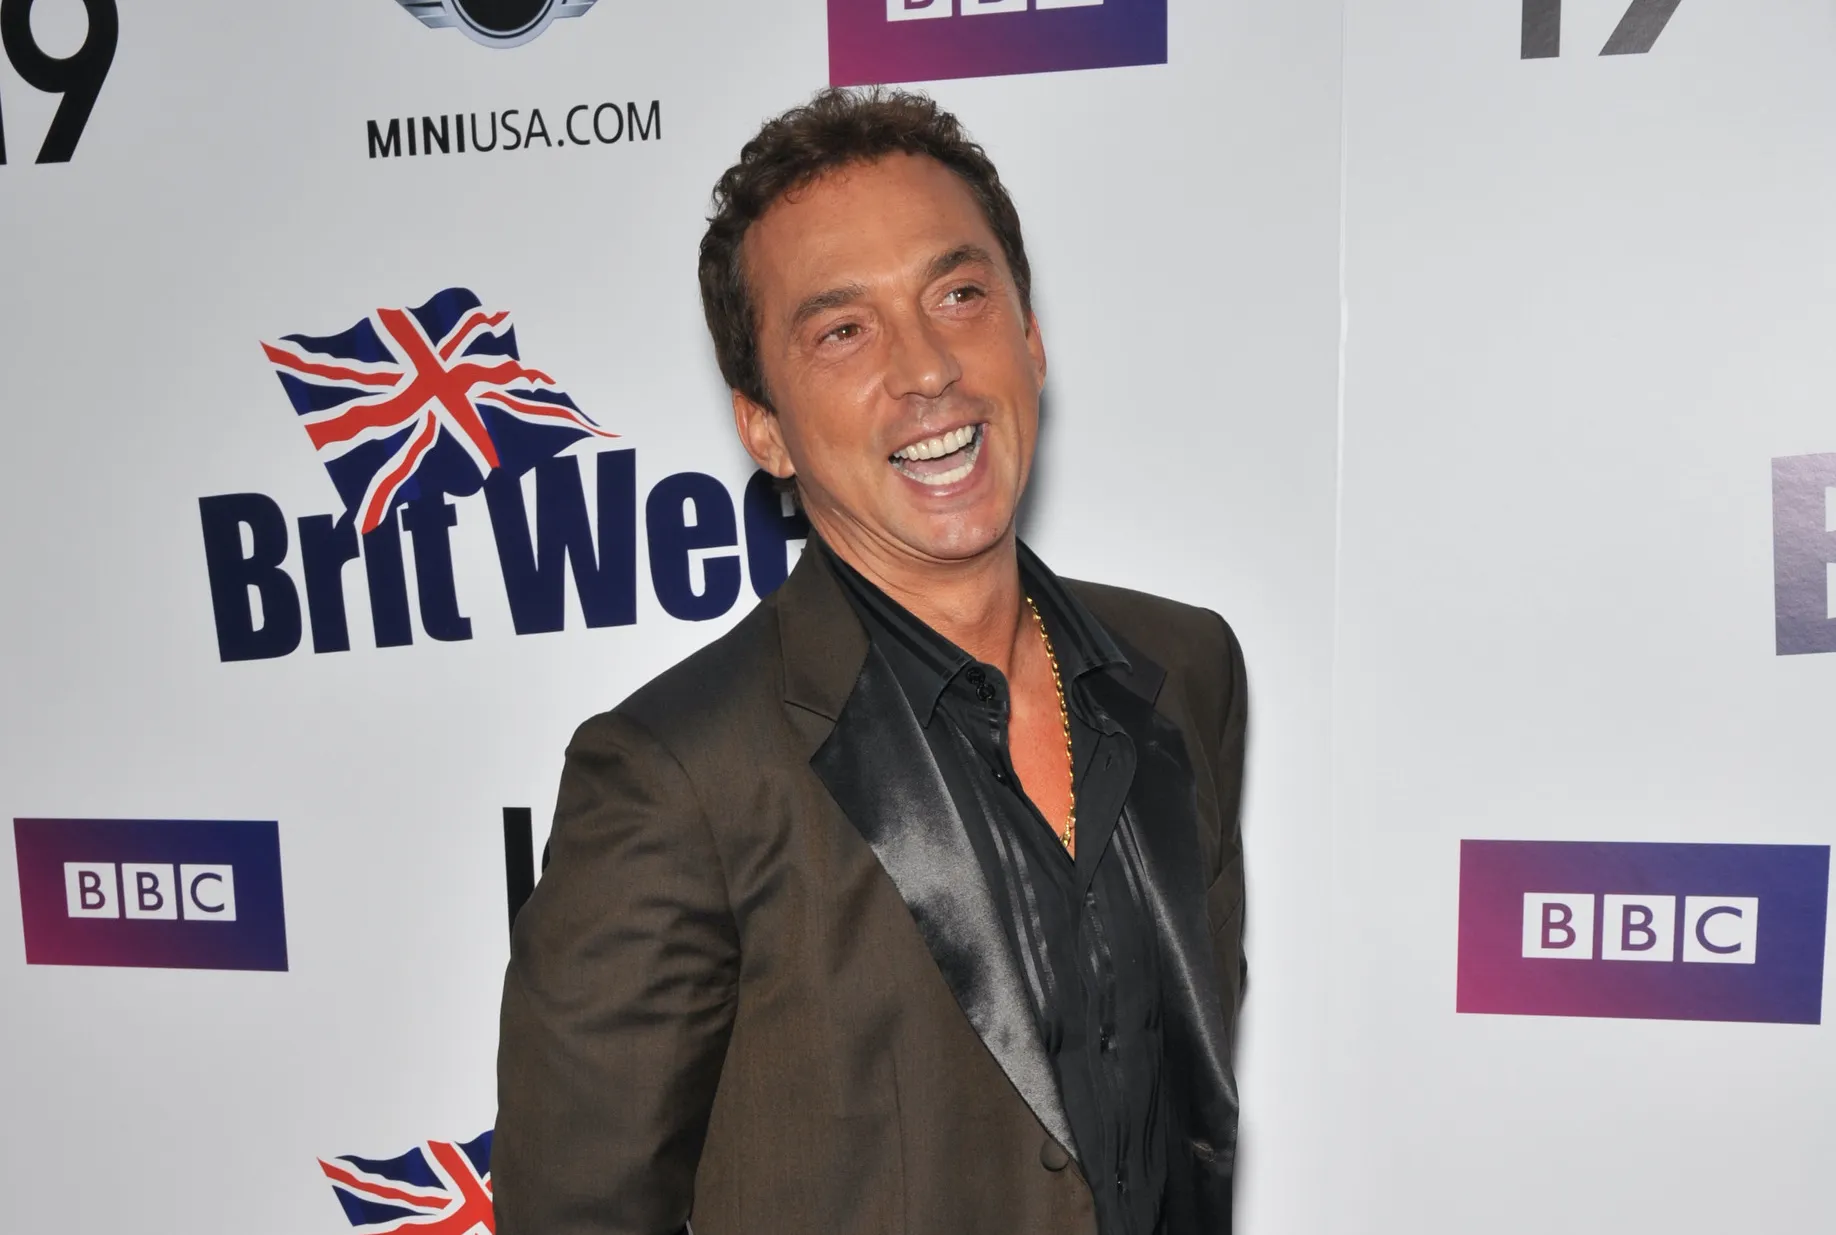 Things You Might Not Know About ‘Dancing With The Stars’ Judge Bruno Tonioli